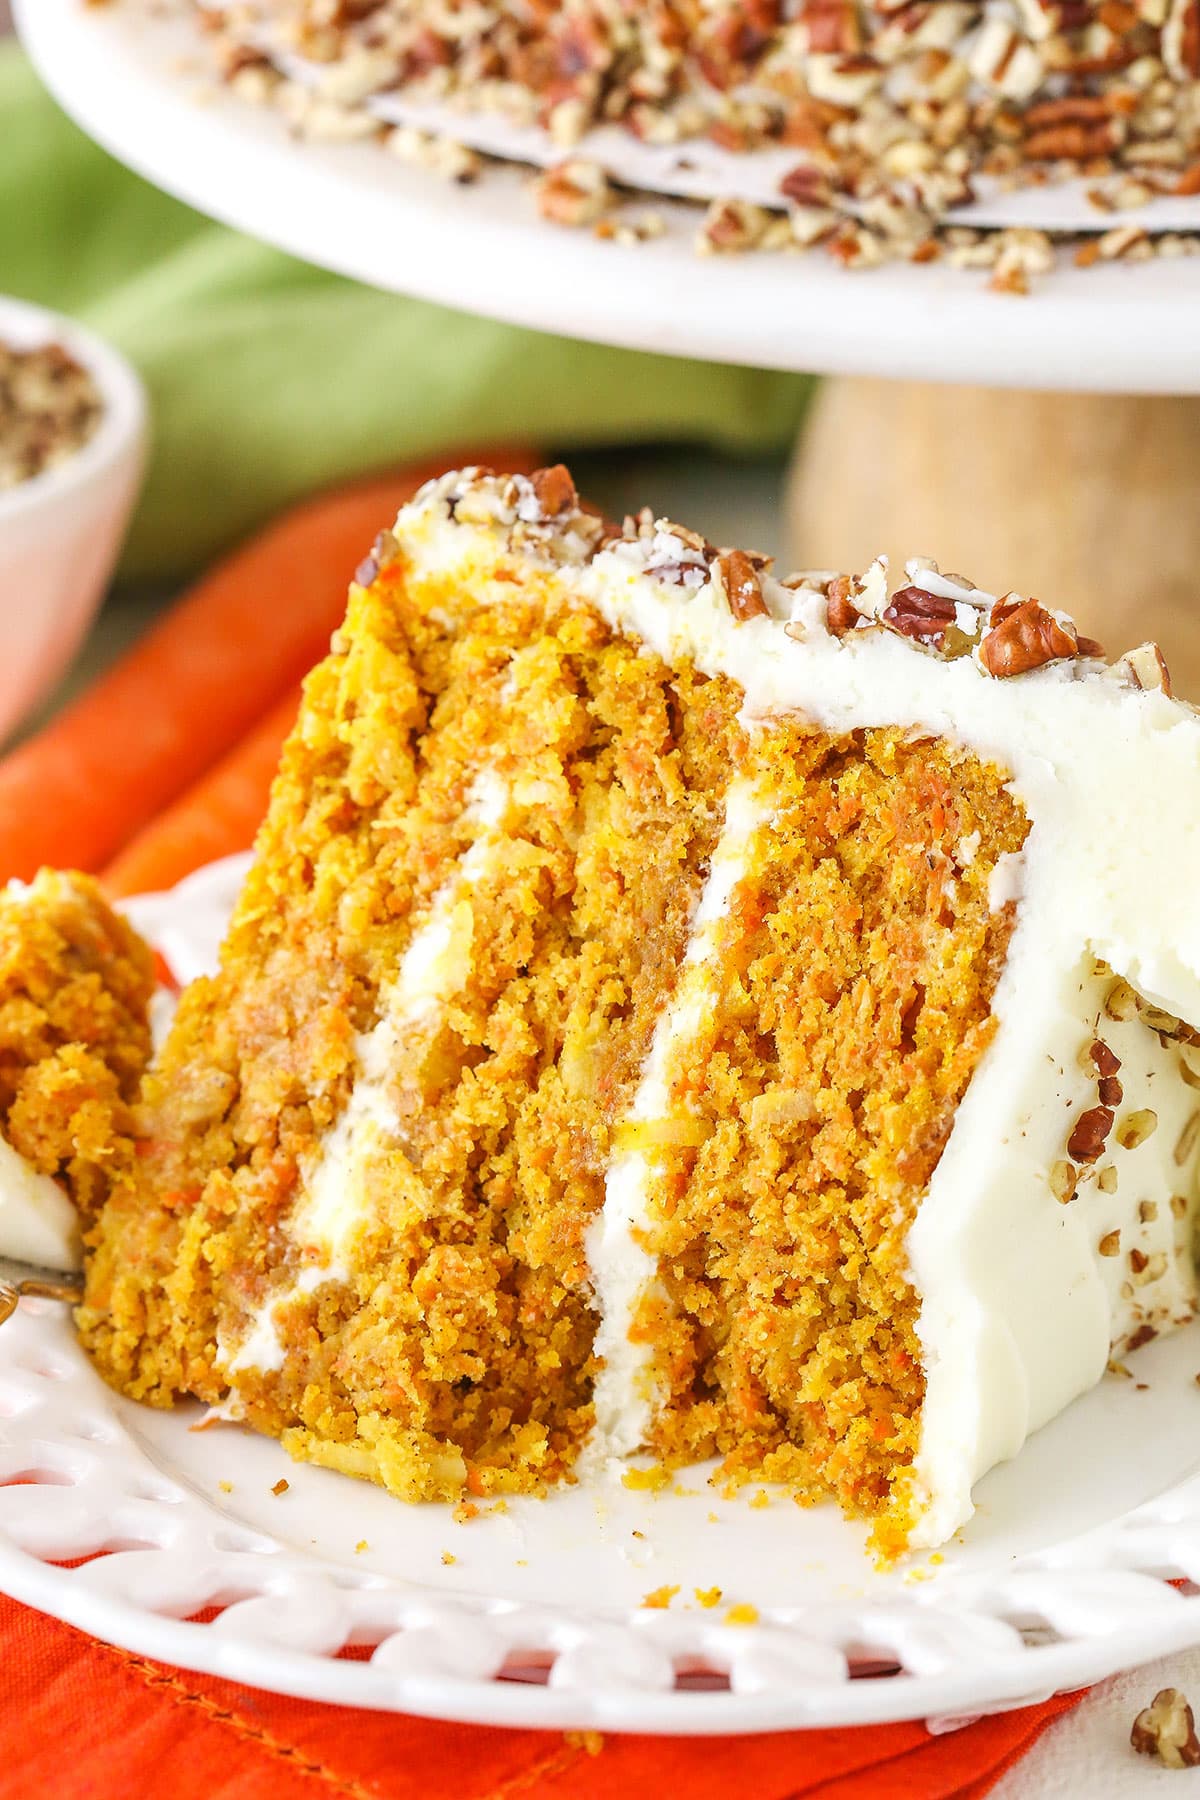 A slice of Carrot Cake on it's side with a bite removed next to a silver fork on a white plate